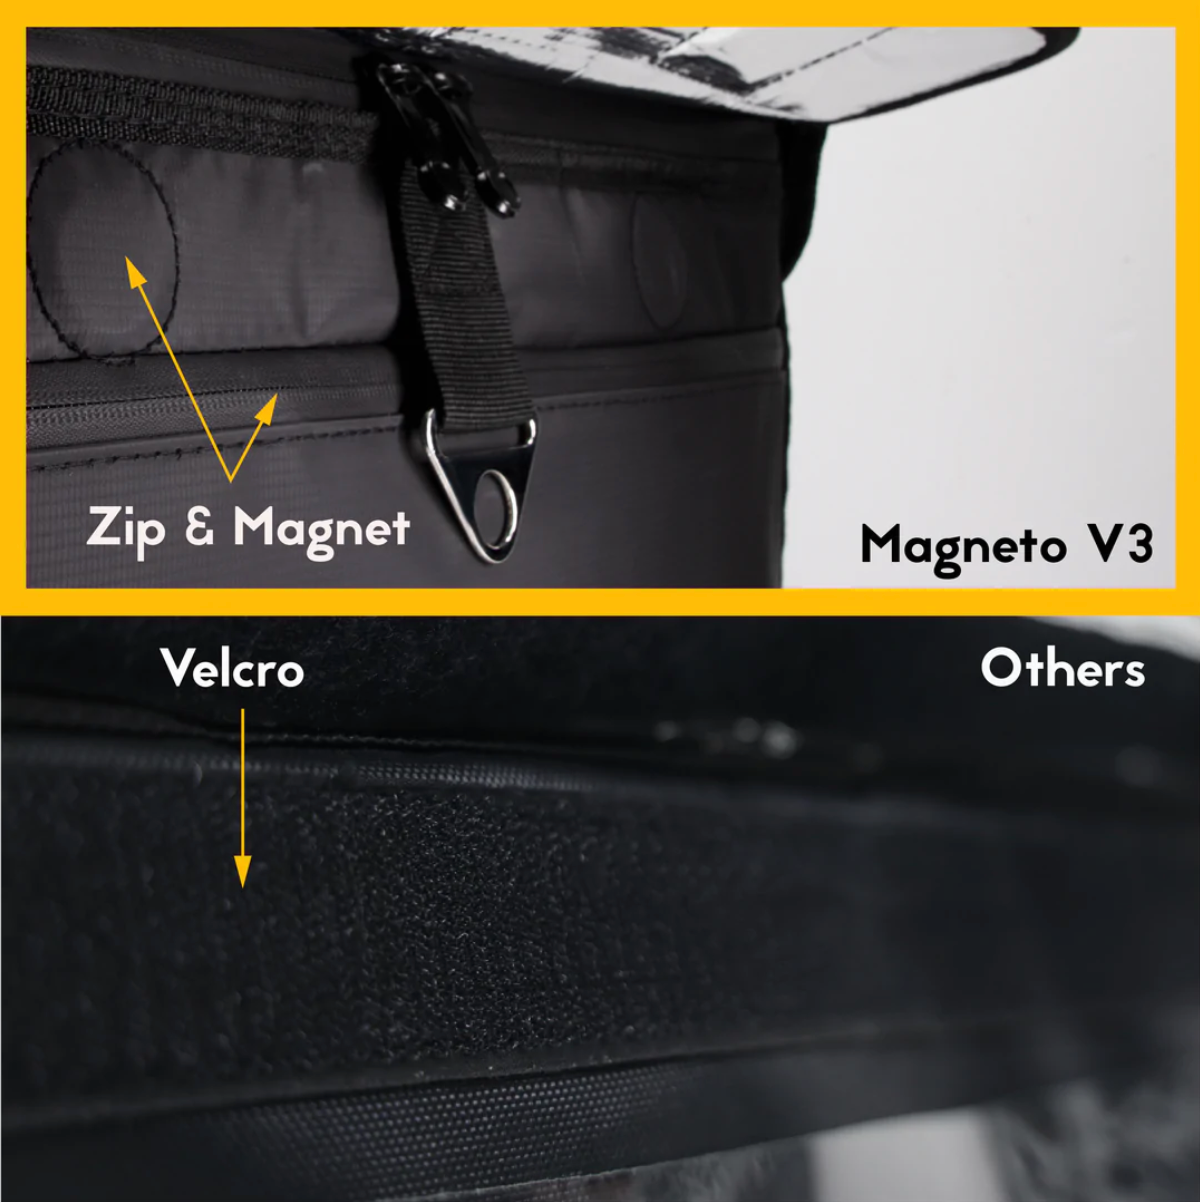 MFC 26L MAGNETO V3 Mini Series Magnetic and Zip with Lock Ring Sling Food Delivery Thermal Bag